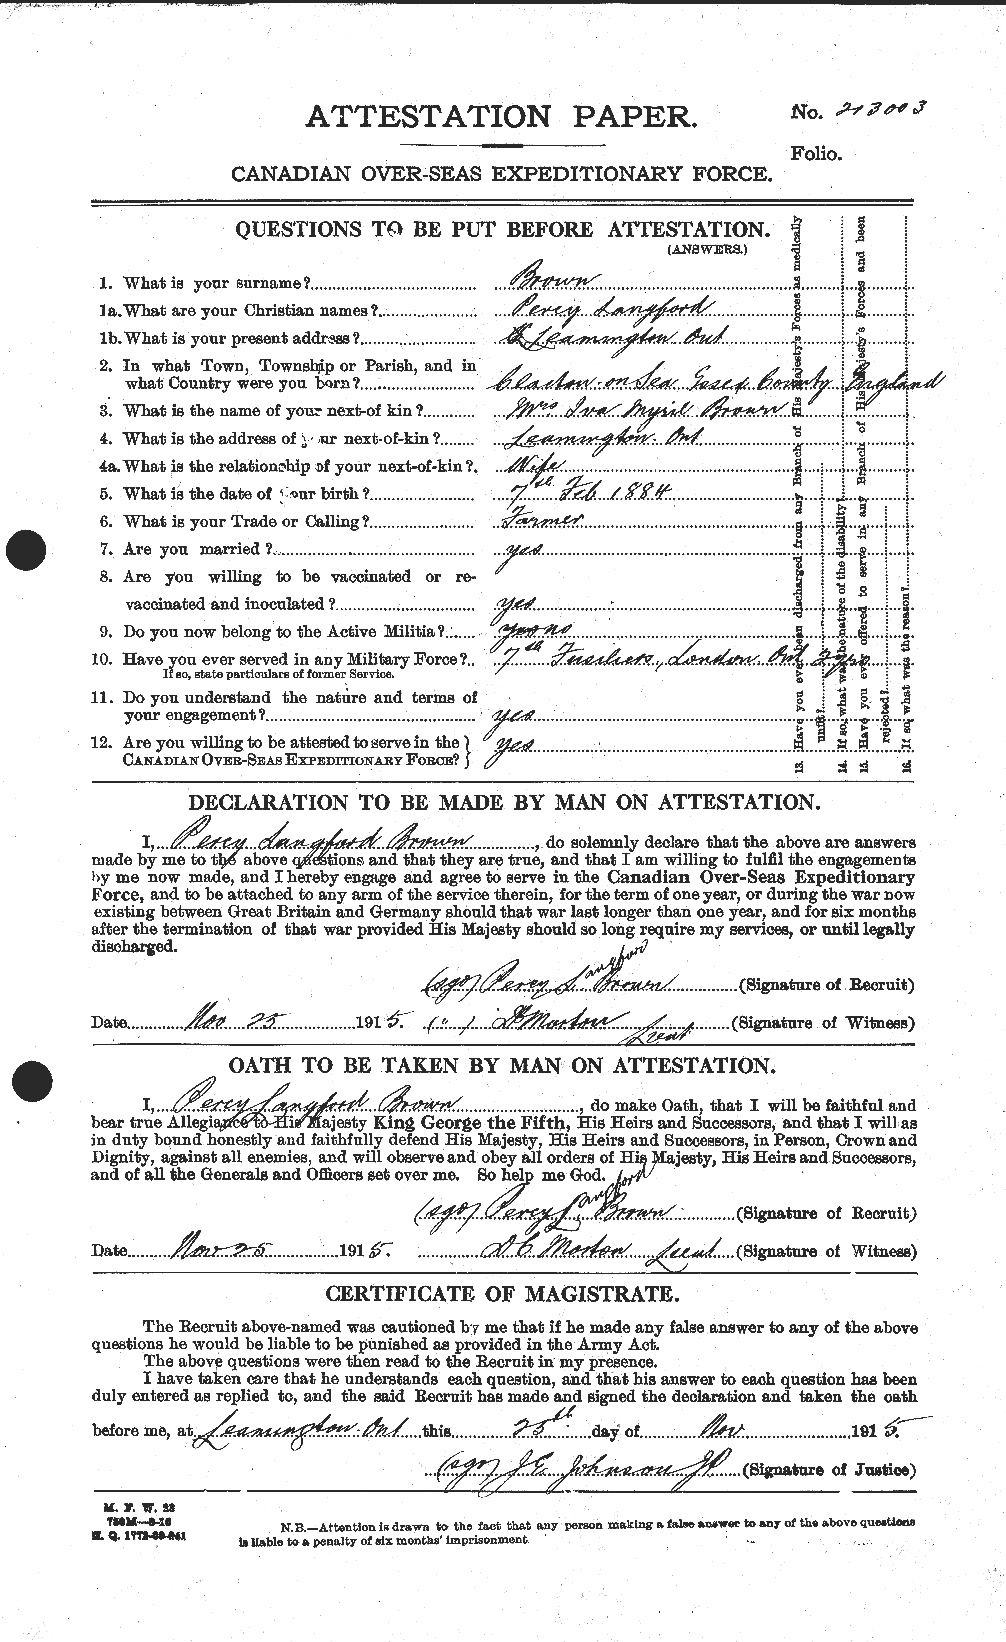 Personnel Records of the First World War - CEF 267174a